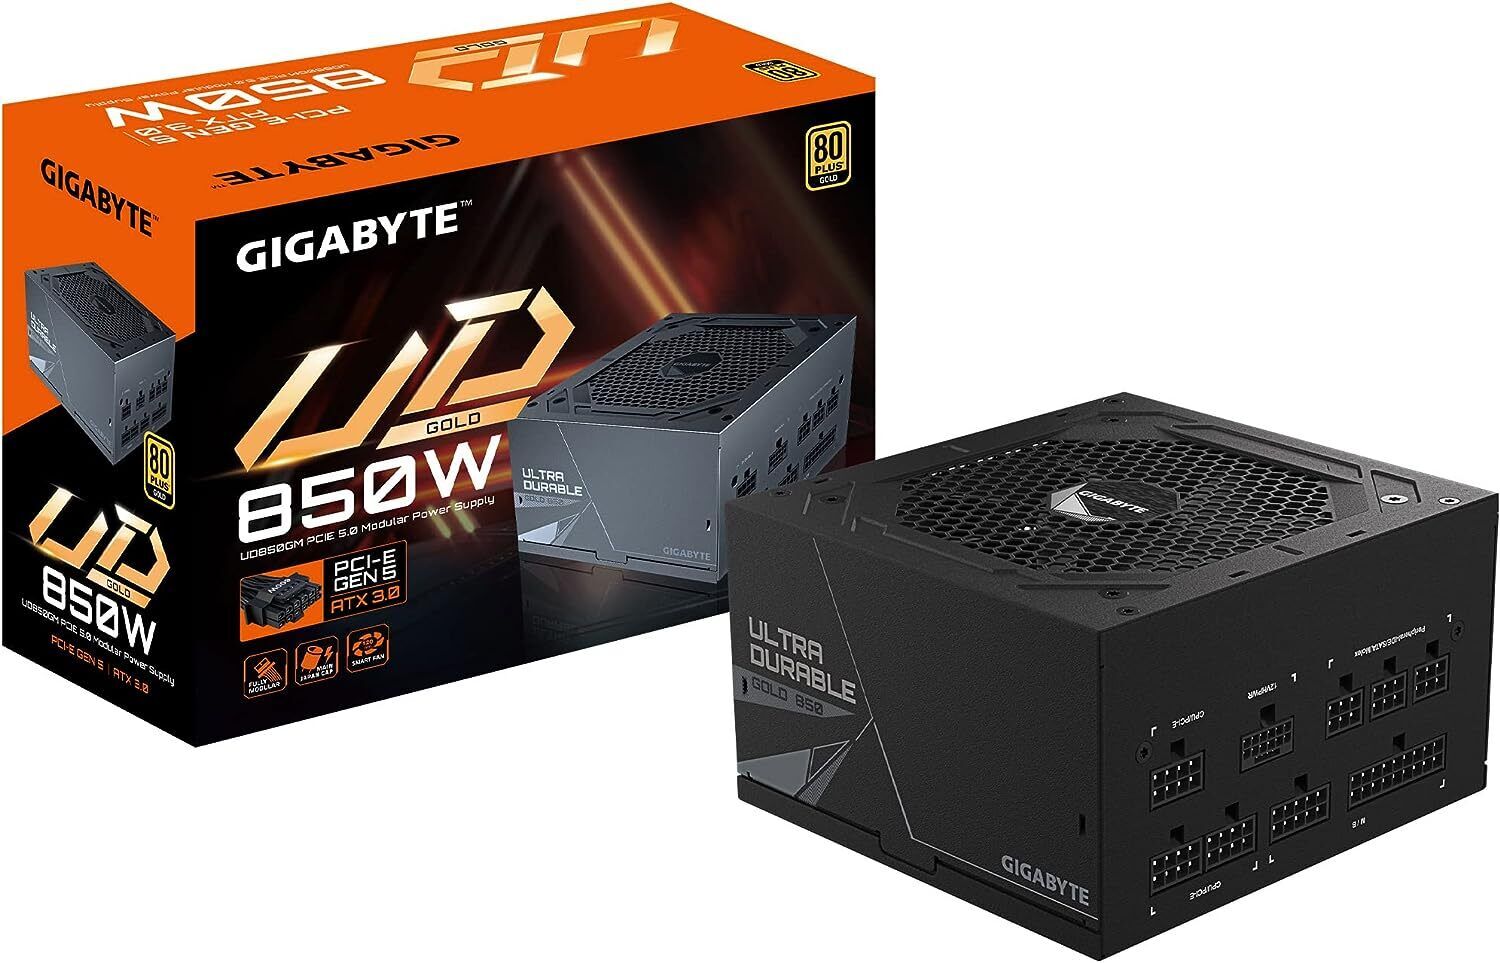 GIGABYTE 850W PCIe 5.0 Ready, 80 Plus Gold Certified, Fully Modular Power Supply